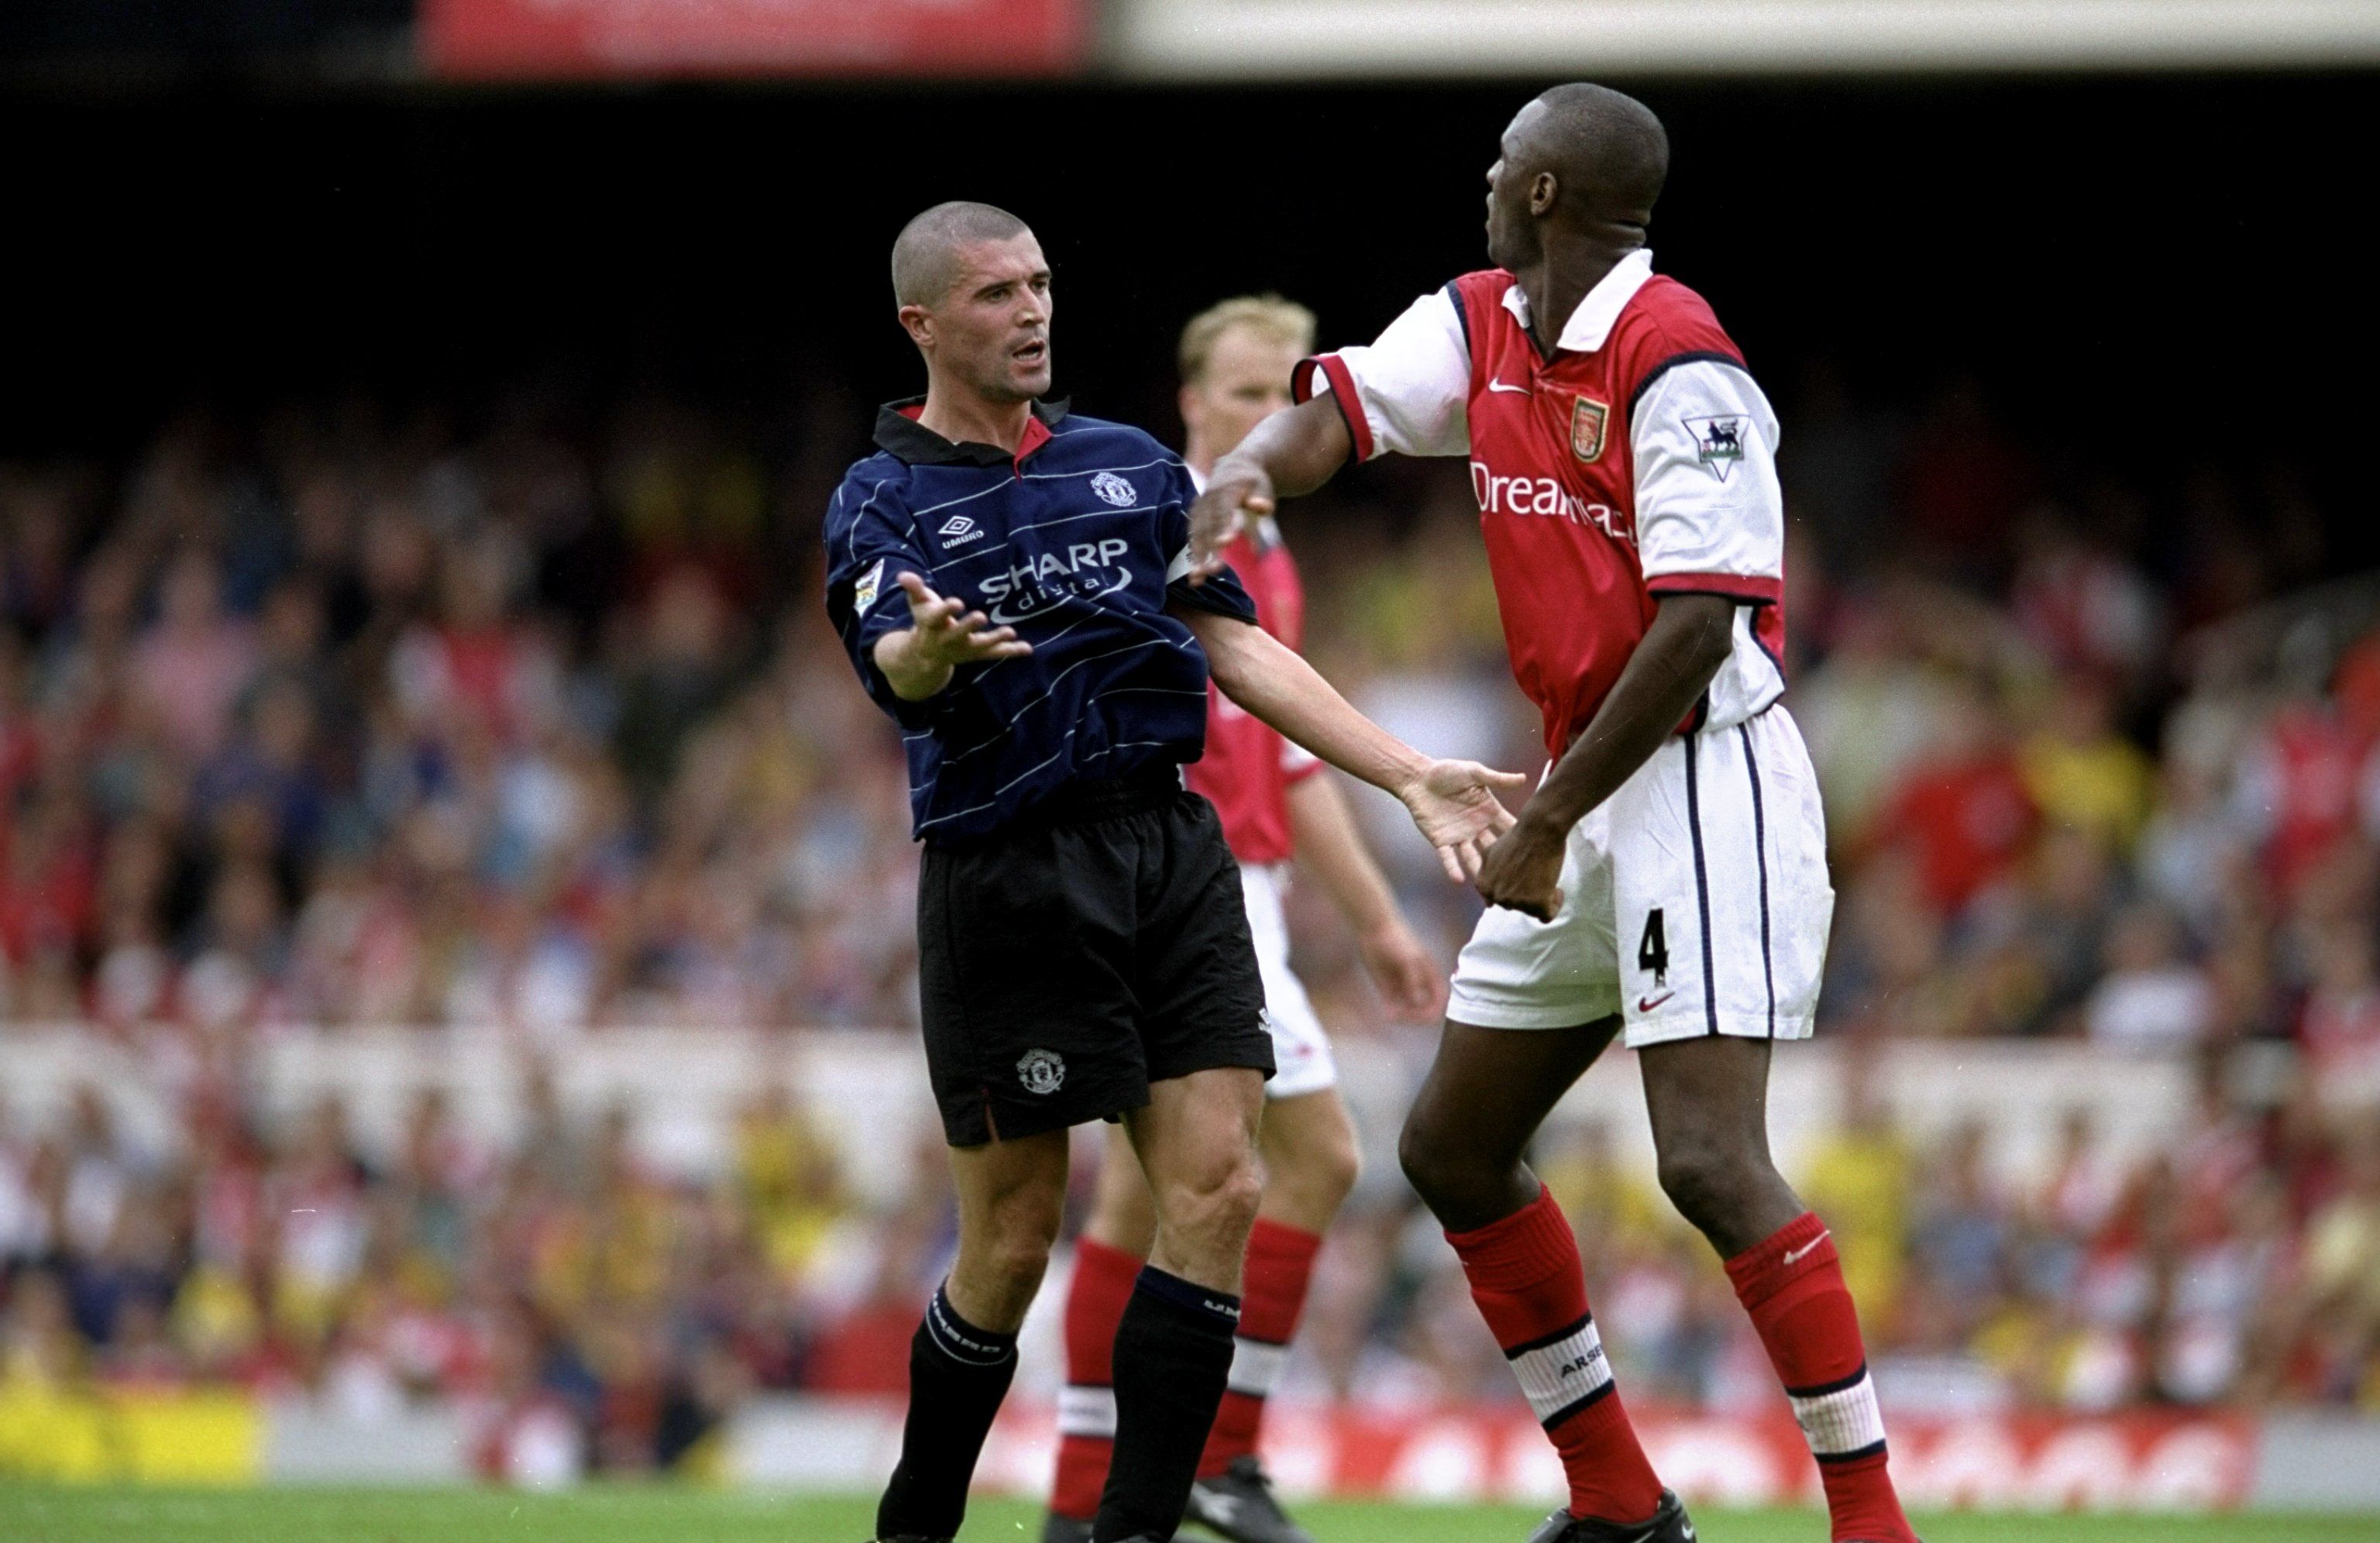 Roy Keane of Manchester United clashes with Patrick Vieira of Arsenal during the FA Carling Premiership match against Arsenal played at Highbury in London, England. The match finished in a 2-1 win to Manchester United.